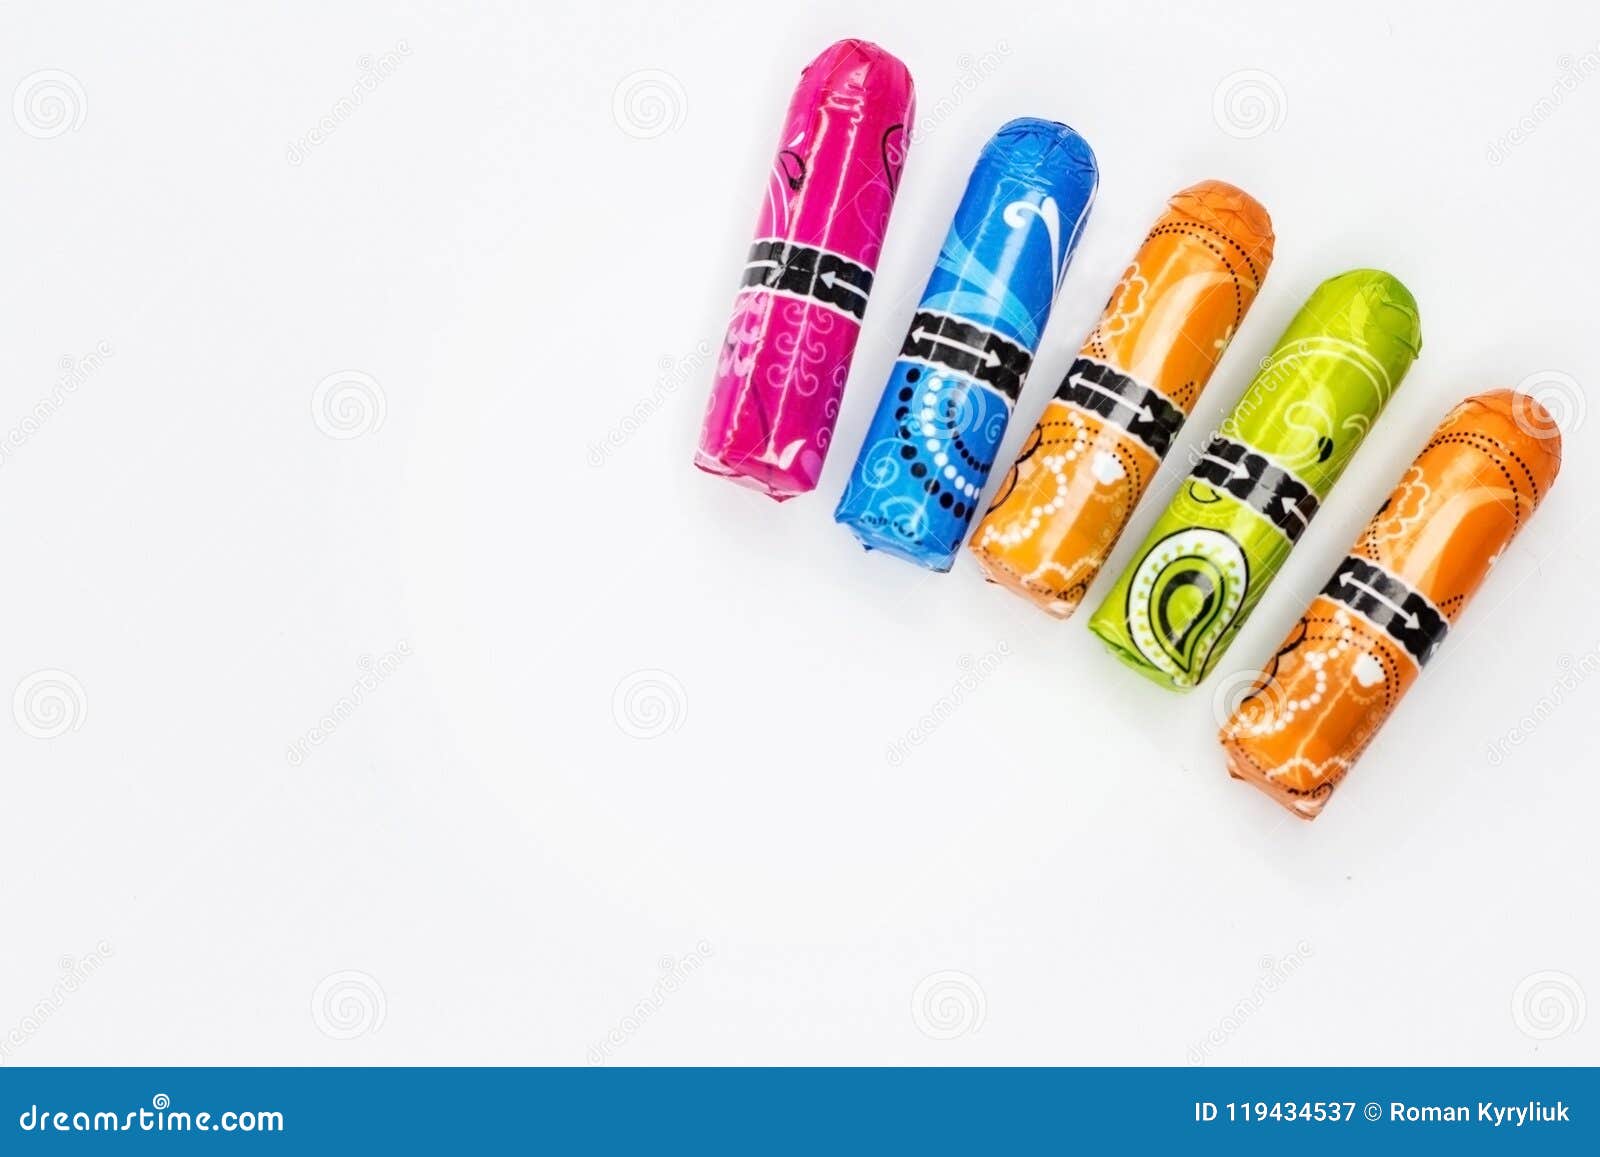 Colored Background Stock Image - Image colorful: 119434537